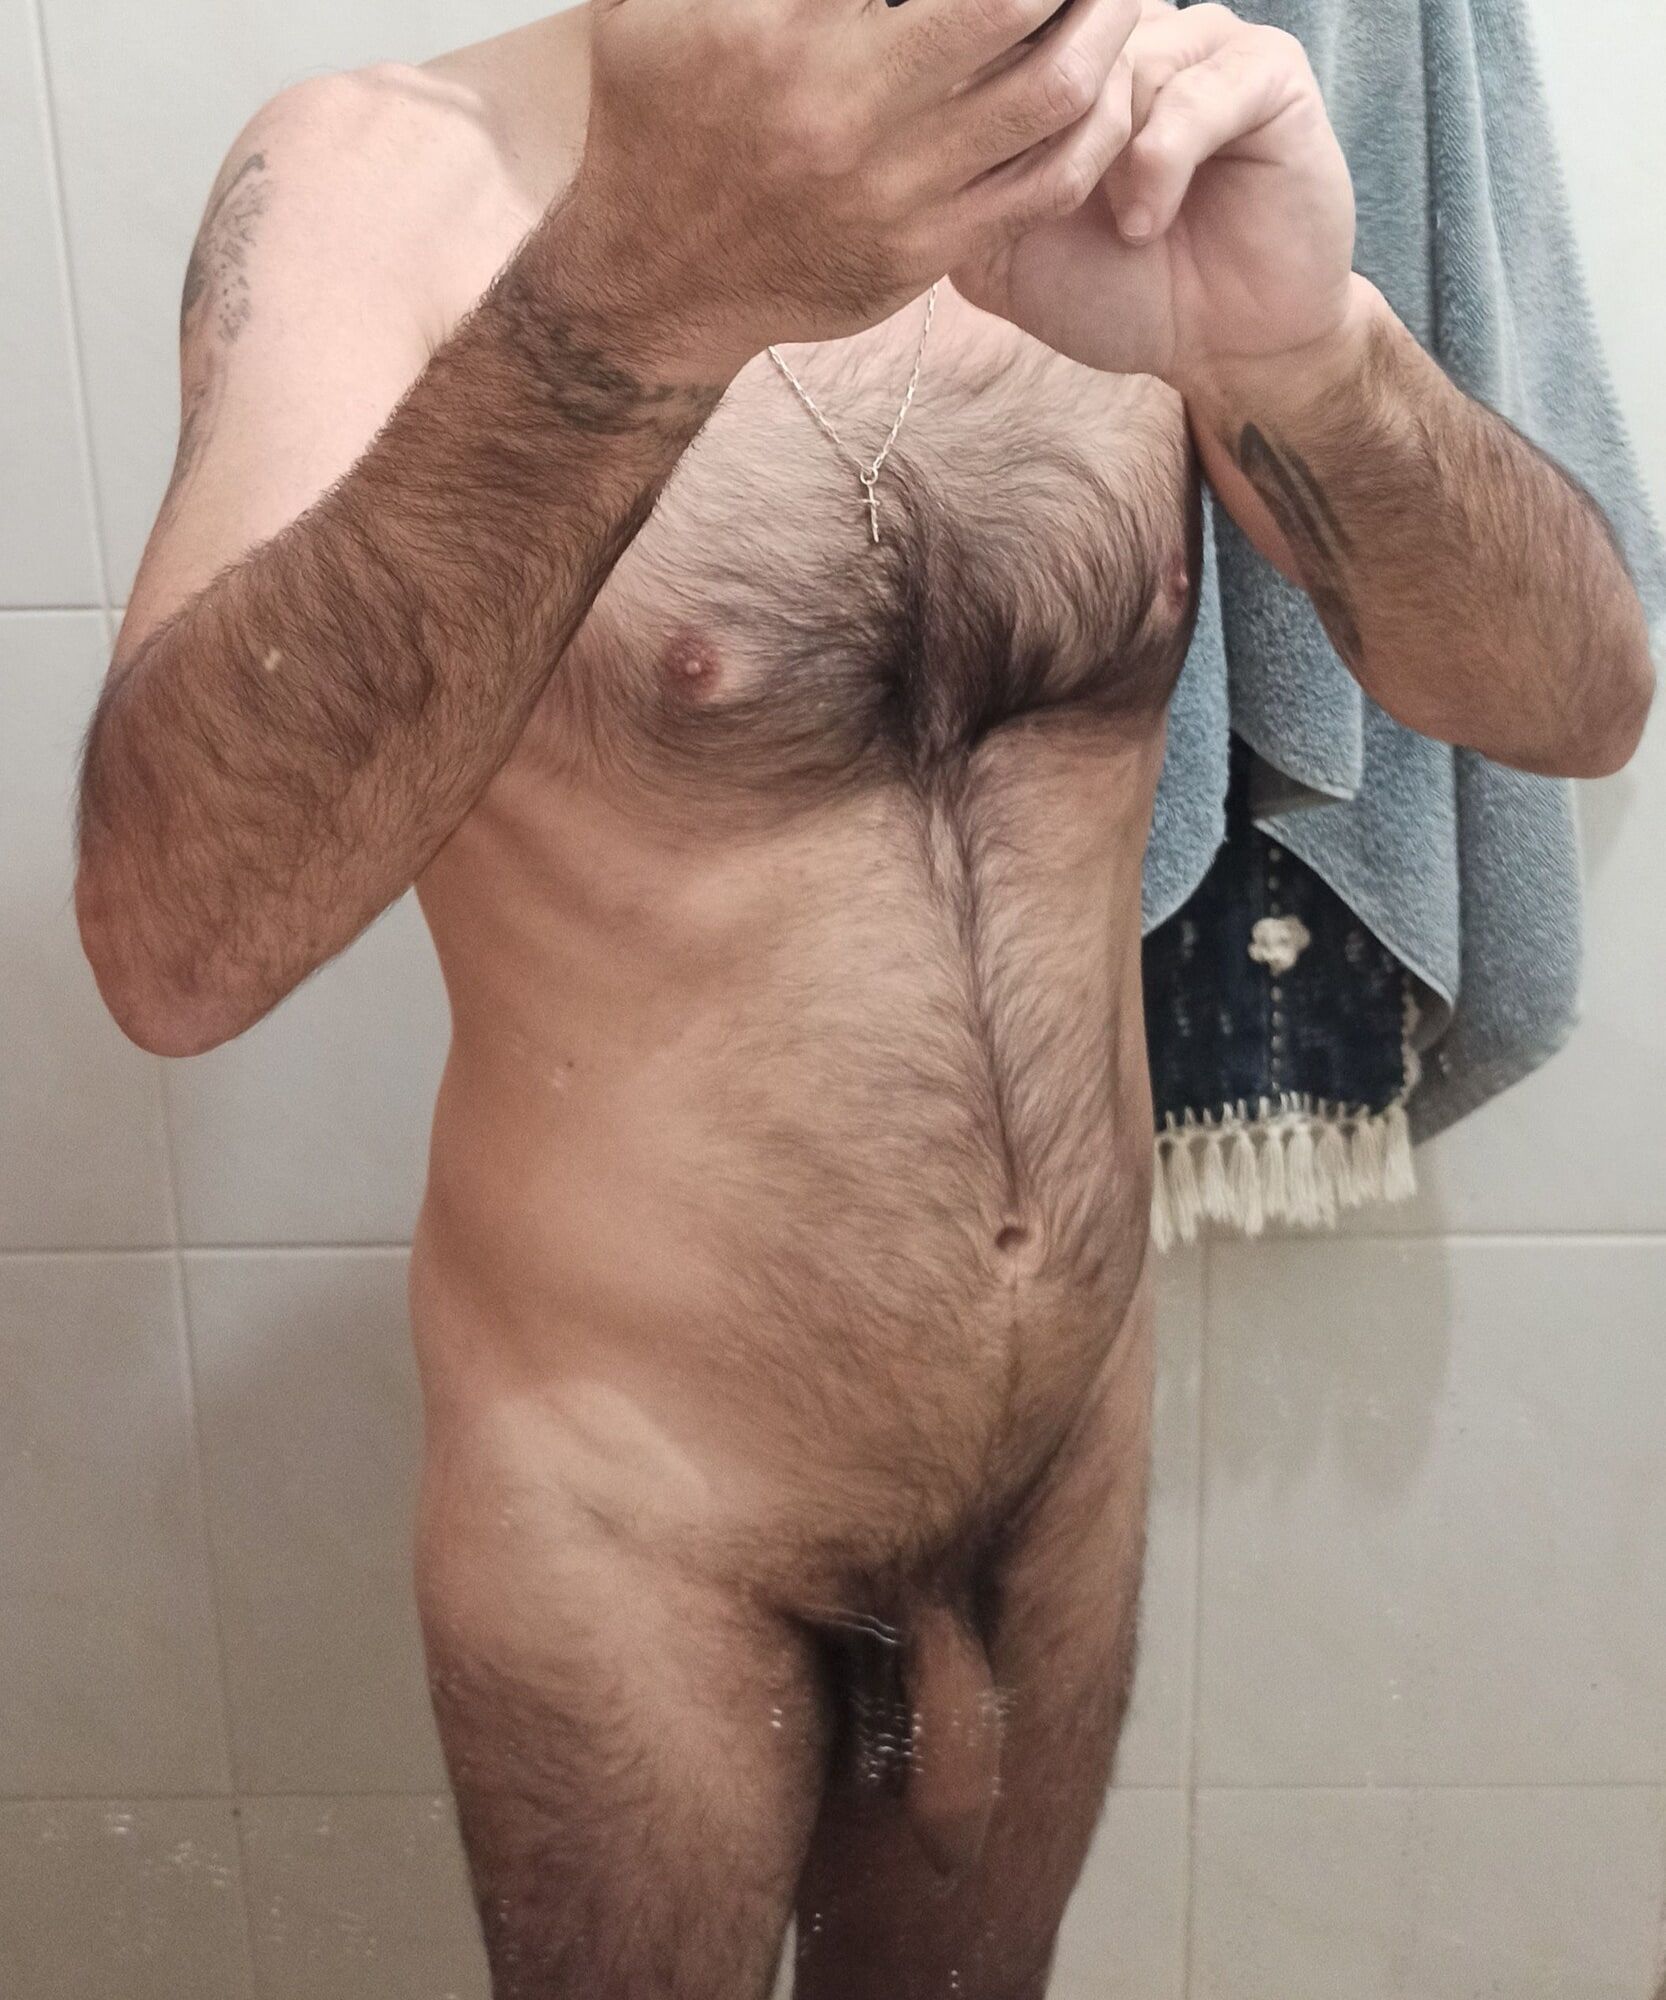 Me naked #6